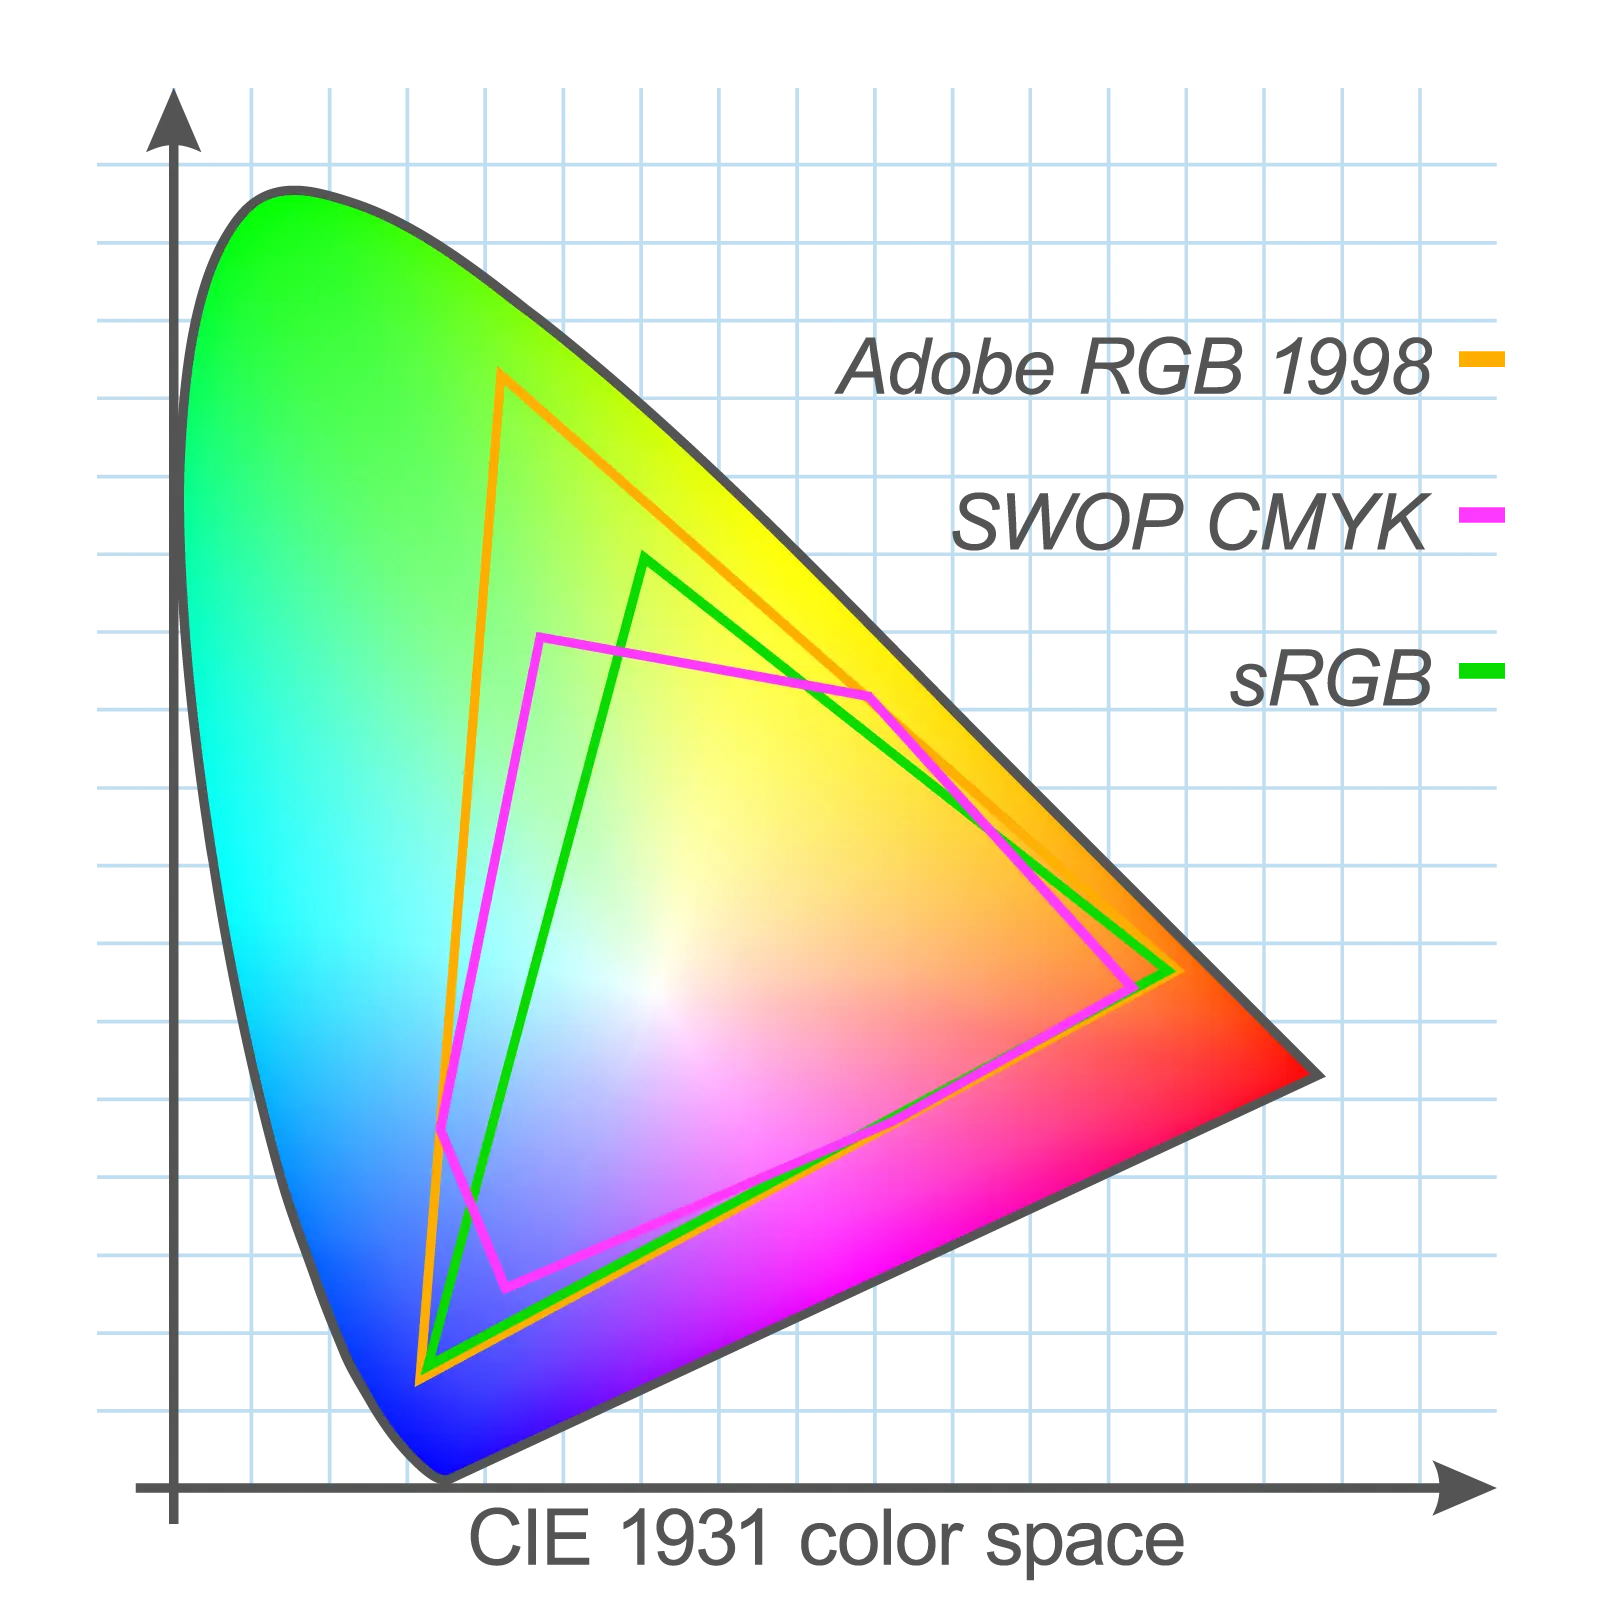 Comparison of gamuts for Adobe RGB, CMYK, and sRGB.